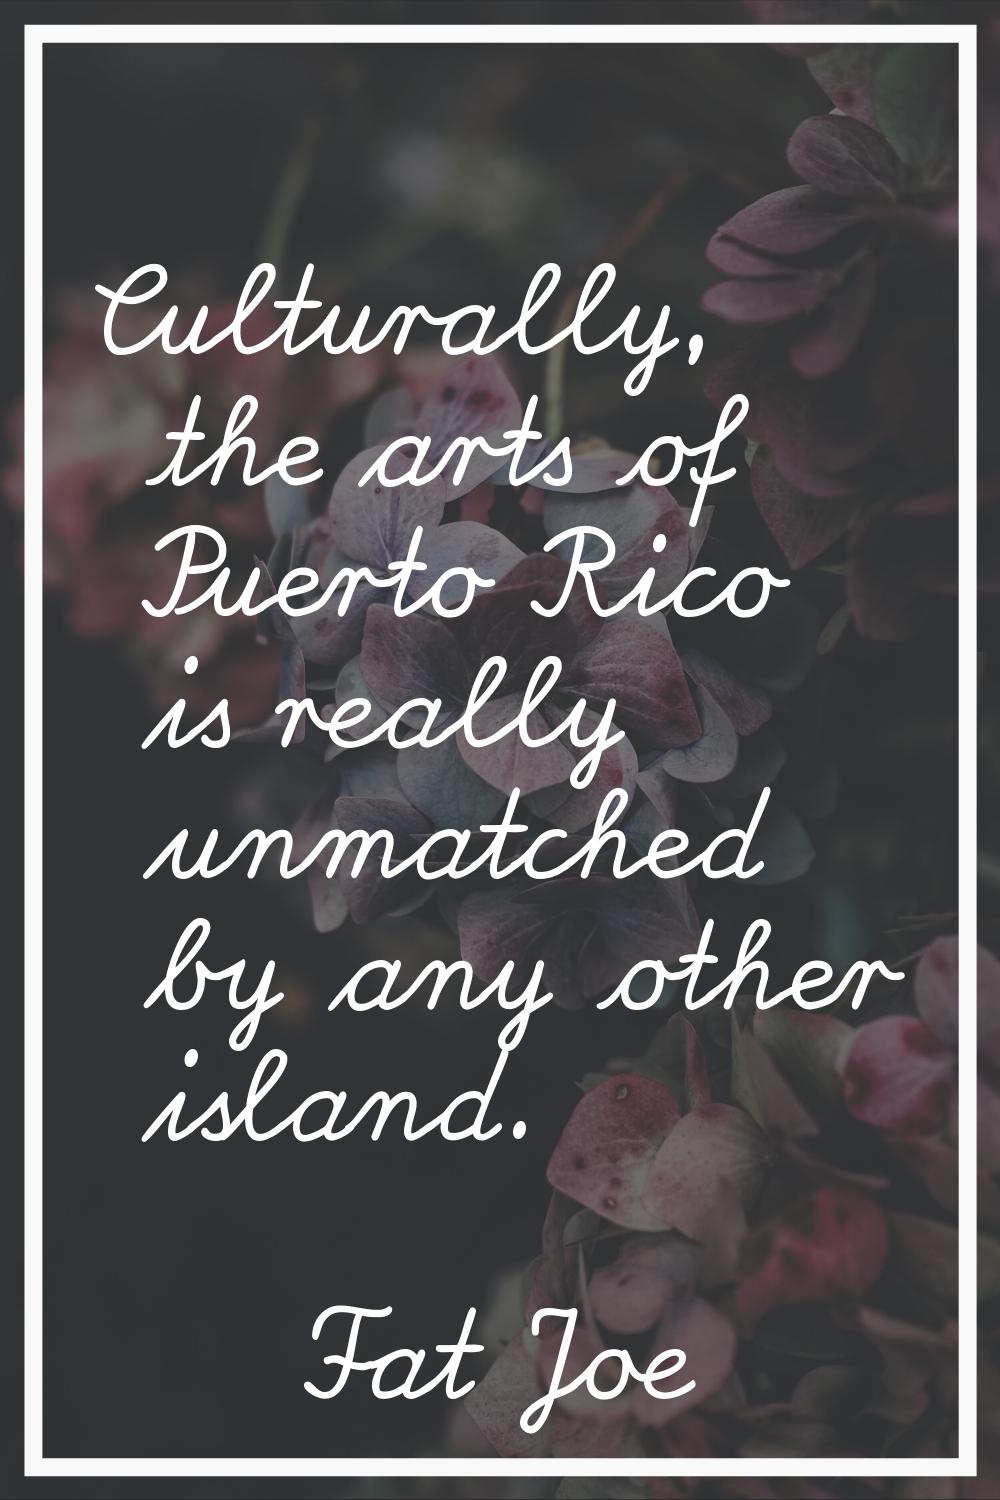 Culturally, the arts of Puerto Rico is really unmatched by any other island.